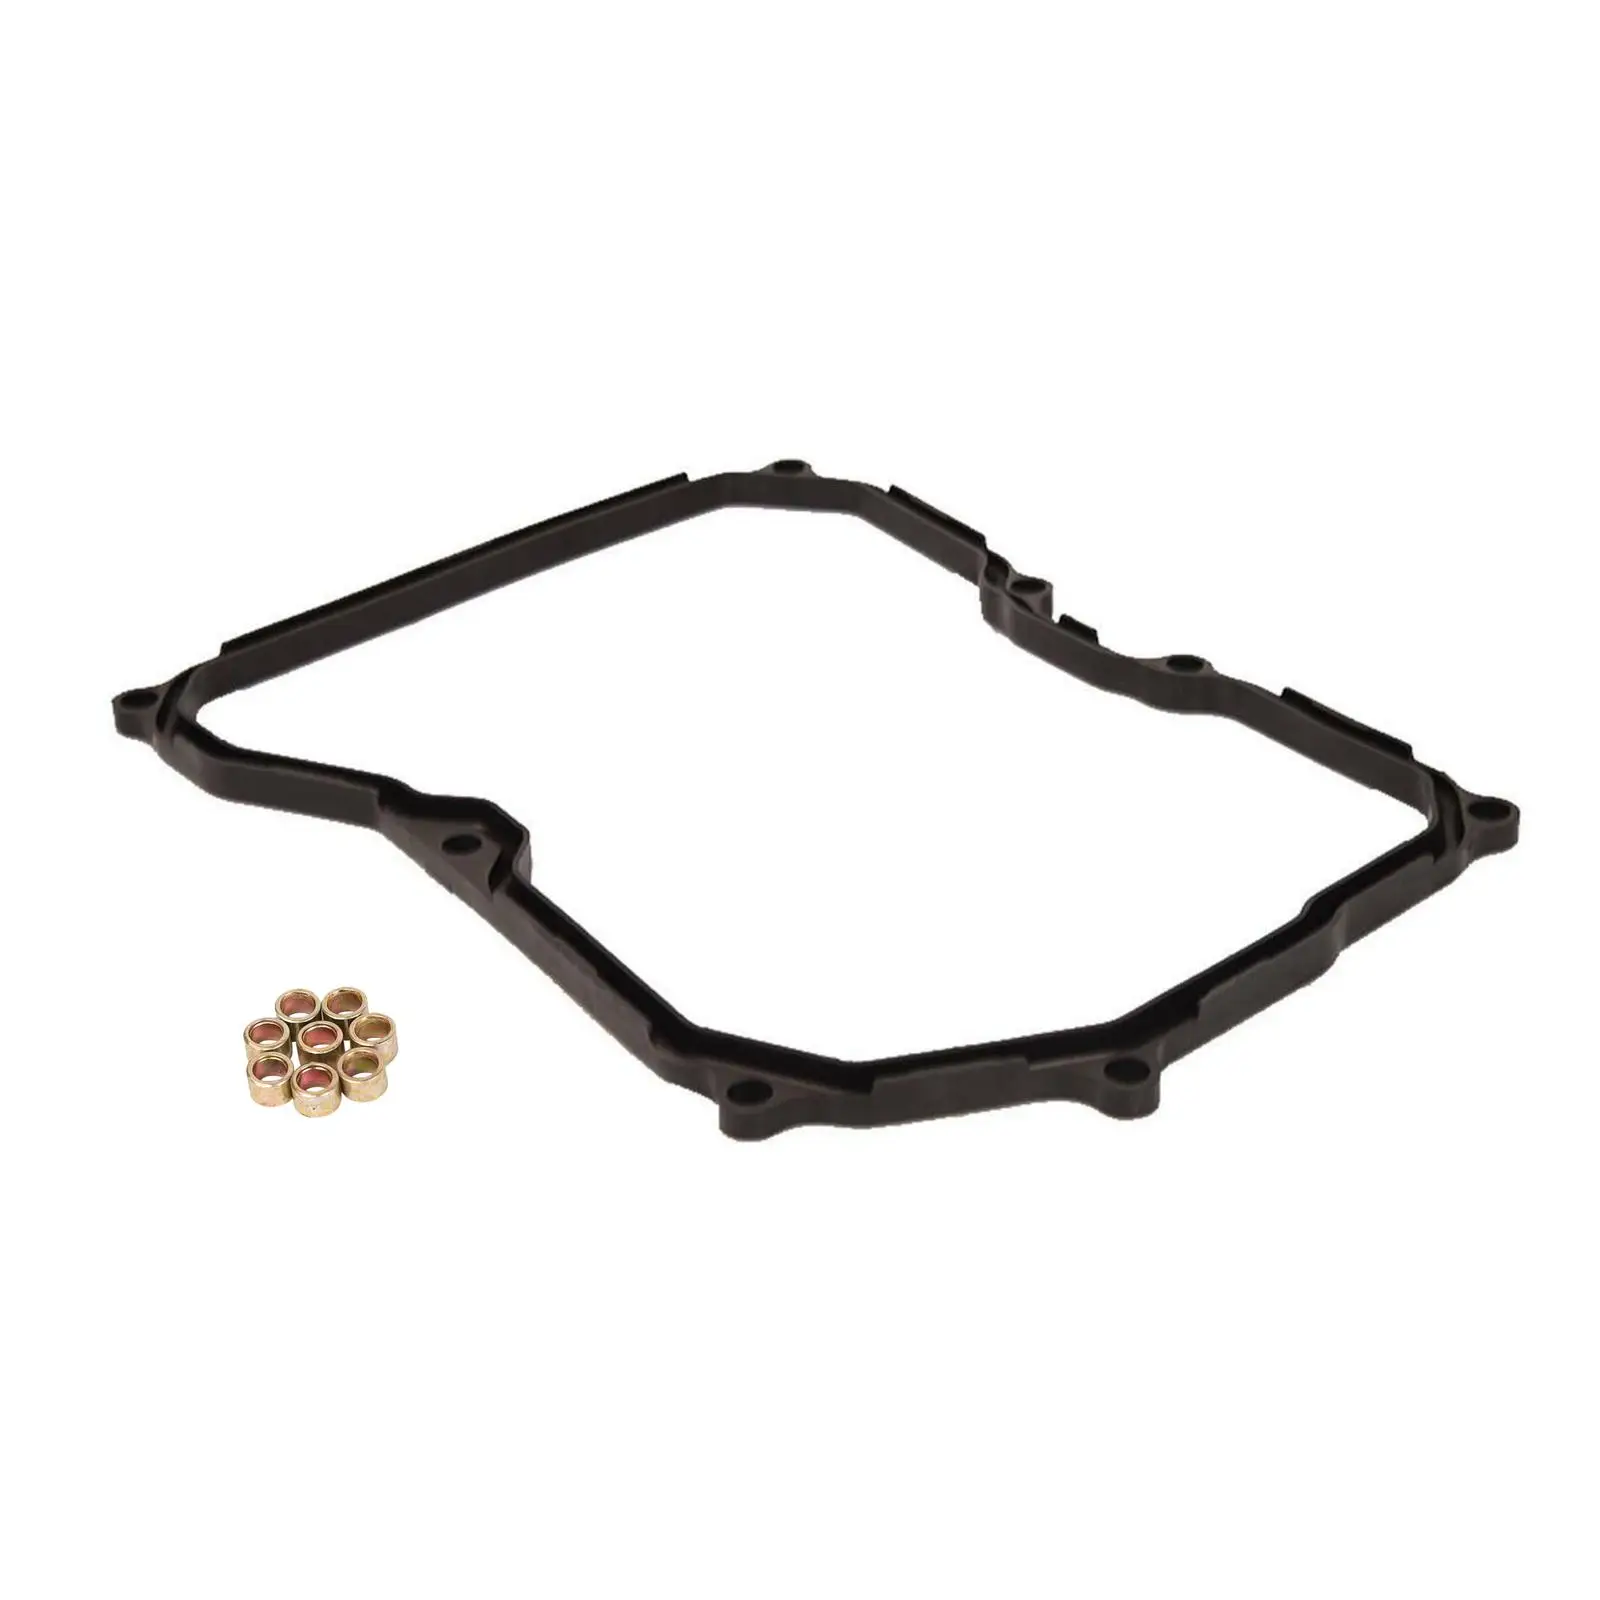 Transmission Pan Gasket Durable Lightweight 24117566356 for Mini Spare Parts Replace Easy to Install Accessories